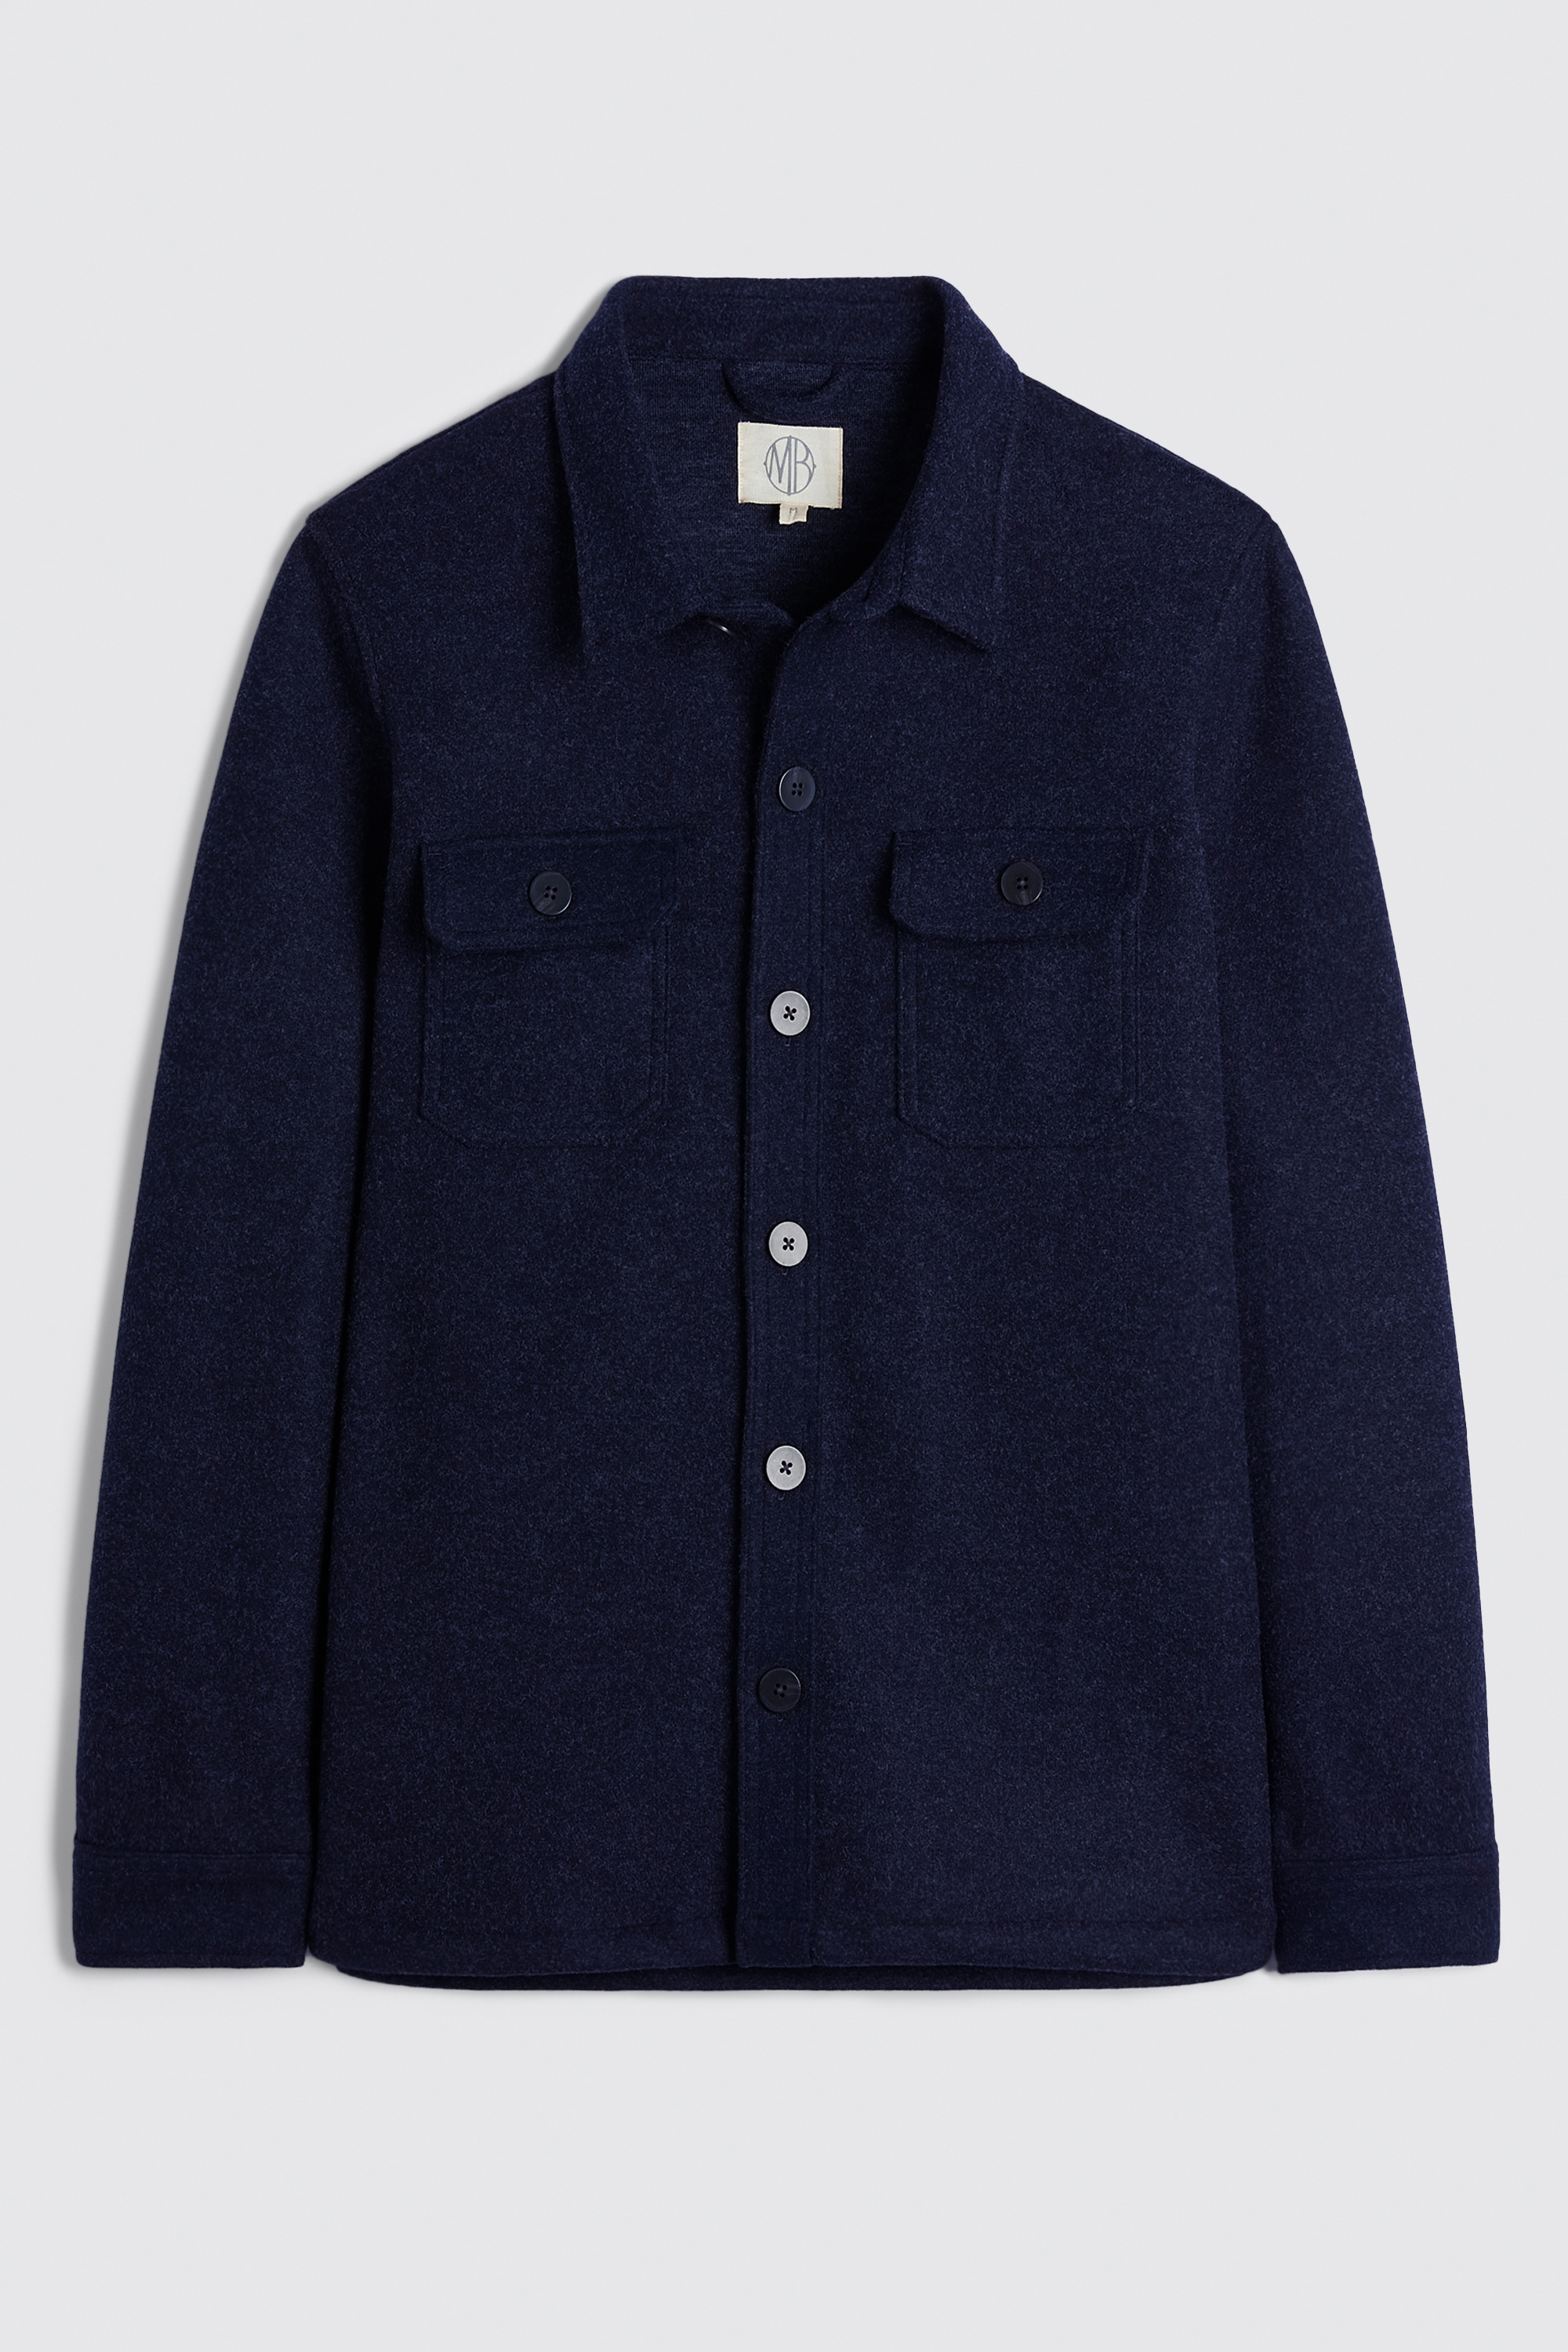 Navy Flannel Shacket | Buy Online at Moss